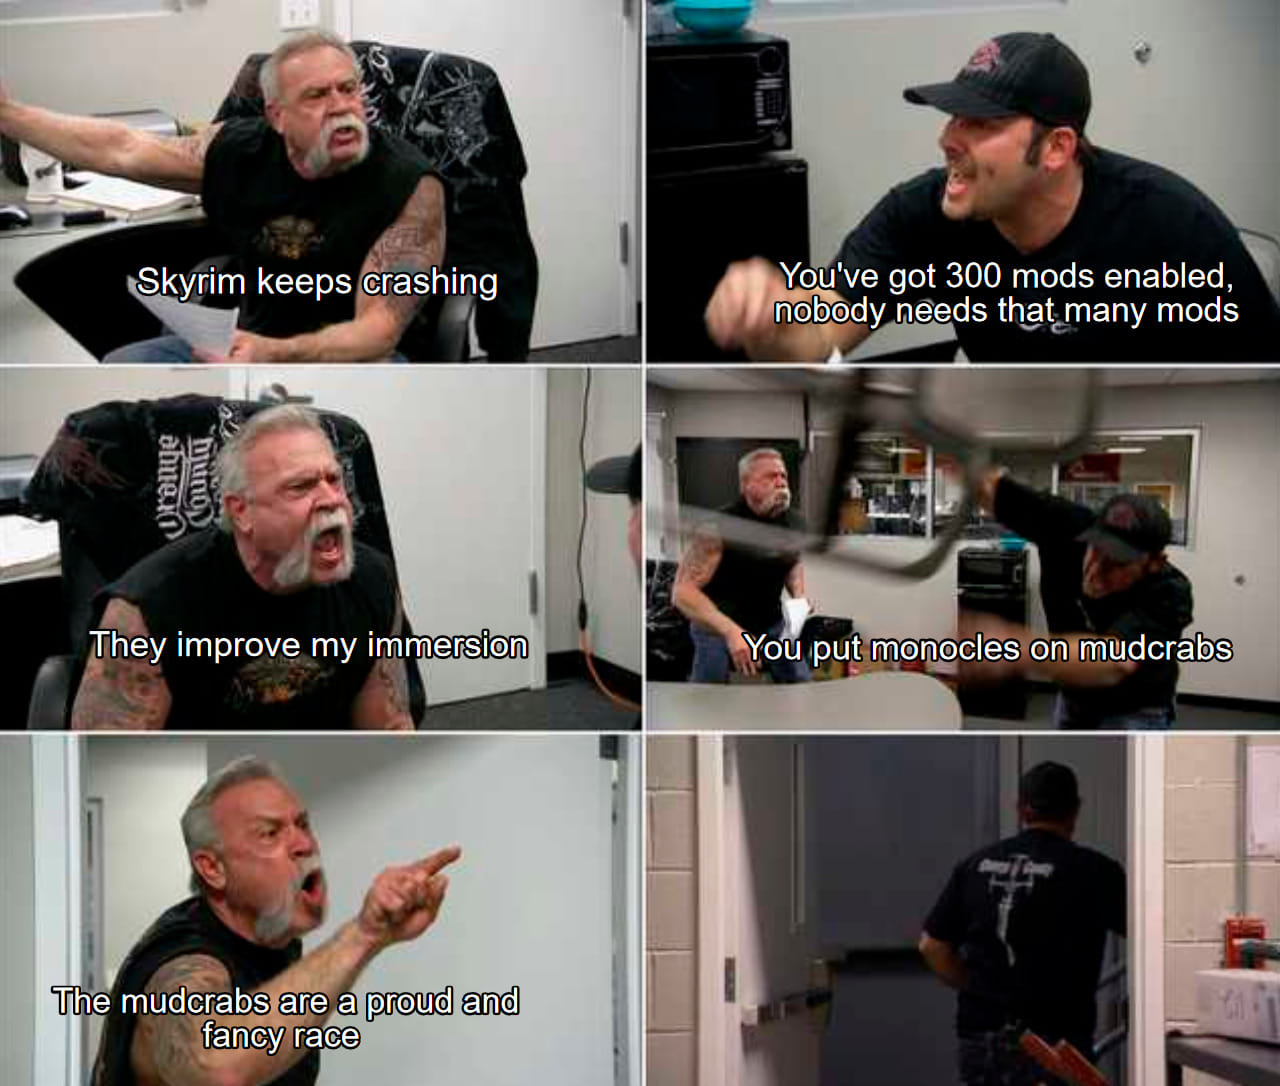 american chopper meme template - Skyrim keeps crashing You've got 300 mods enabled, nobody needs that many mods dhe bunoD They improve my immersion You put monocles on mudcrabs The mudcrabs are a proud and fancy race